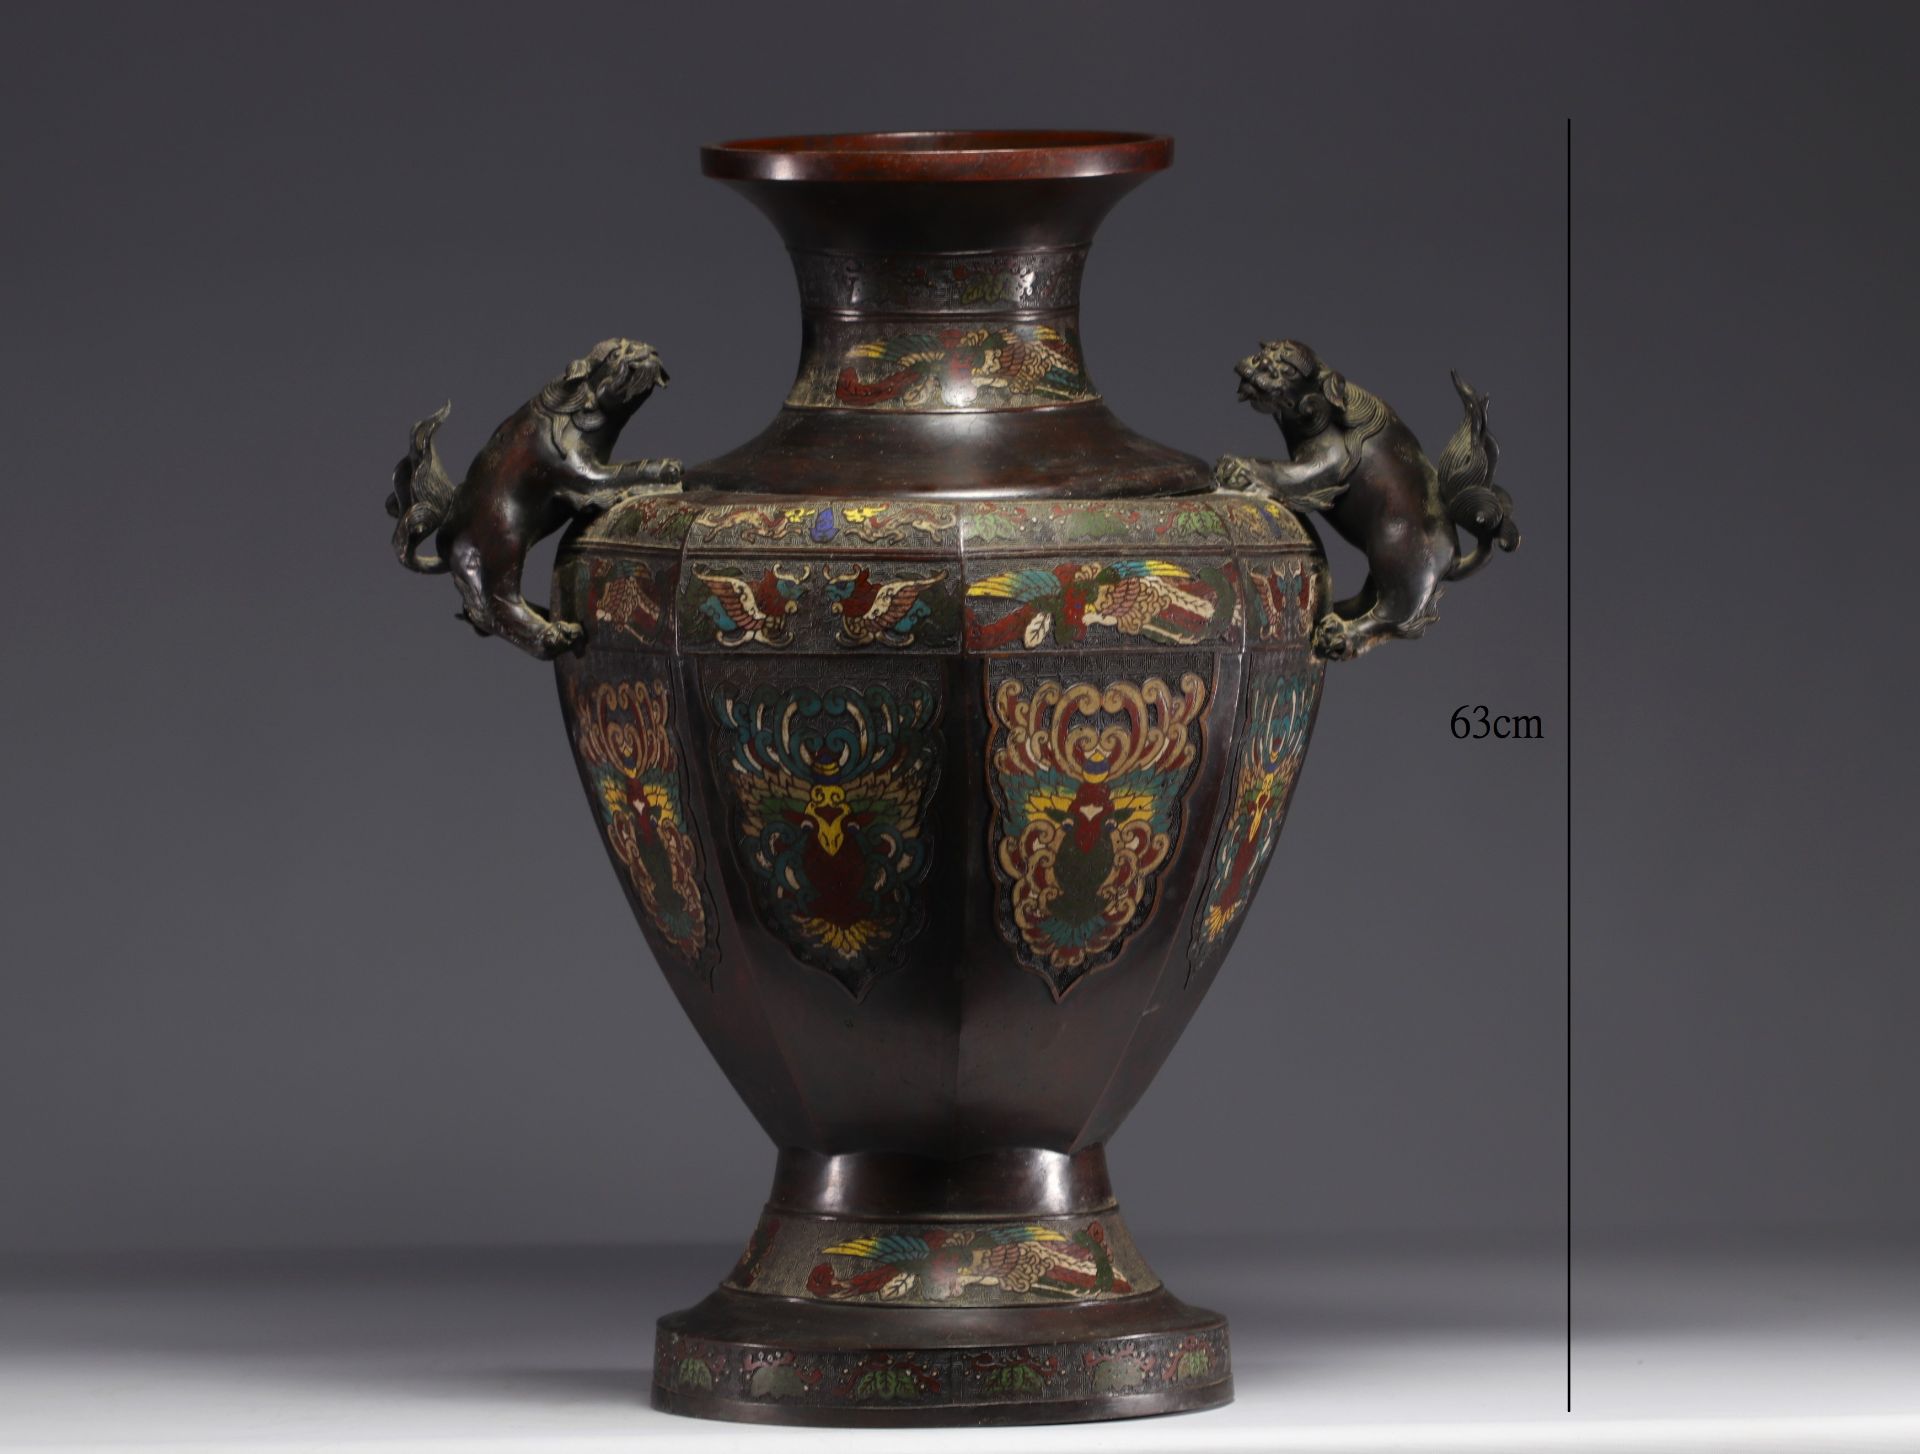 Imposing cloisonne bronze and champleve enamel vase, 19th century Japanese work. Mark in relief unde